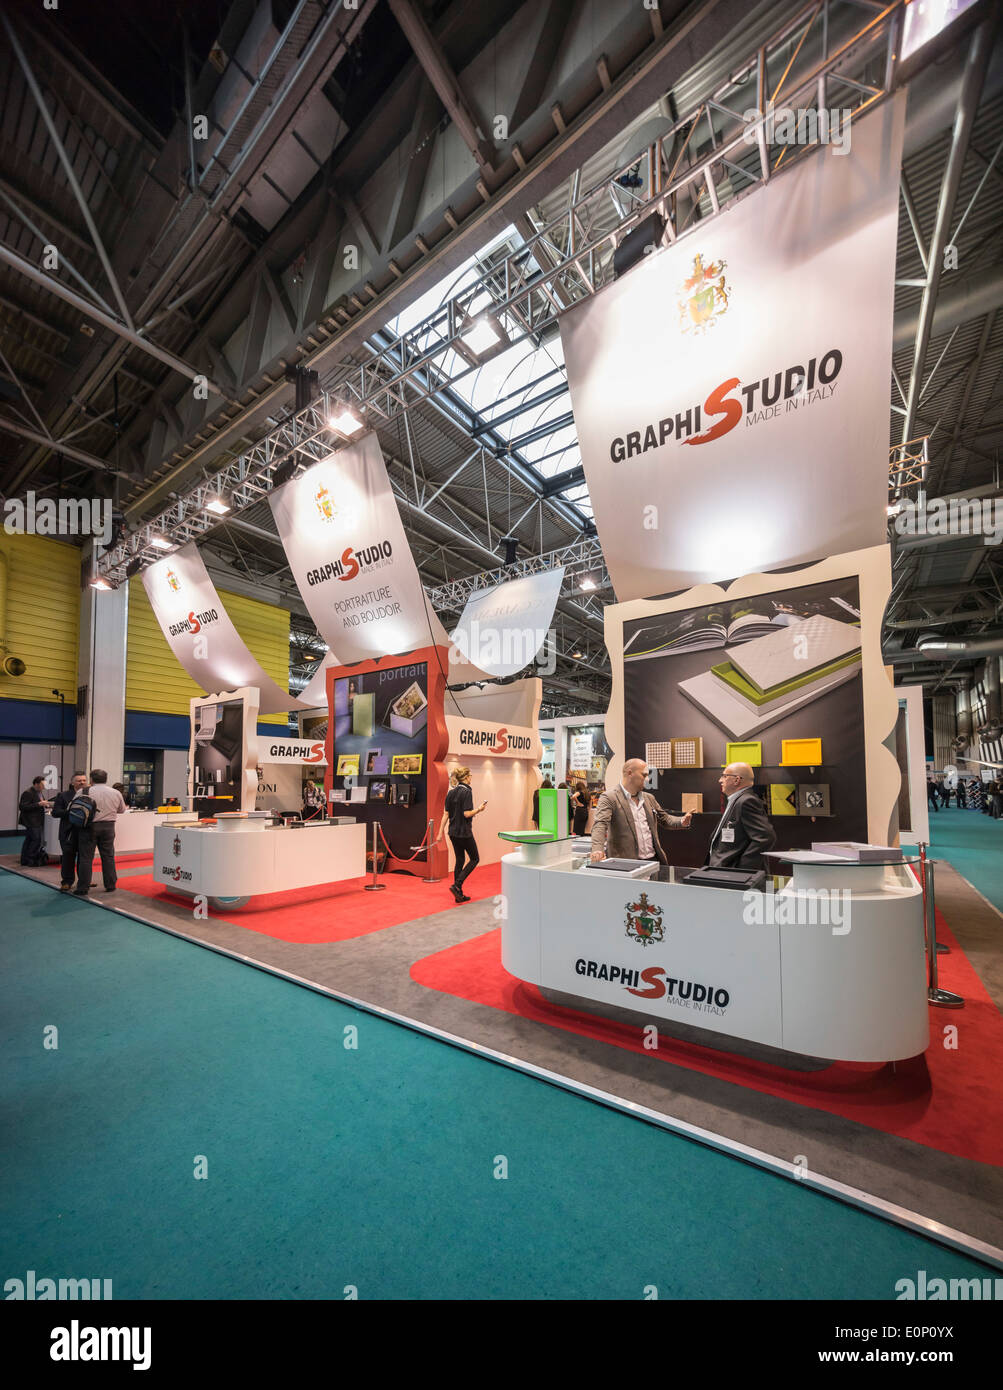 The Photography Show, National Exhibition Centre, Birmingham, England, March 2014. Graphistudio stand. Stock Photo